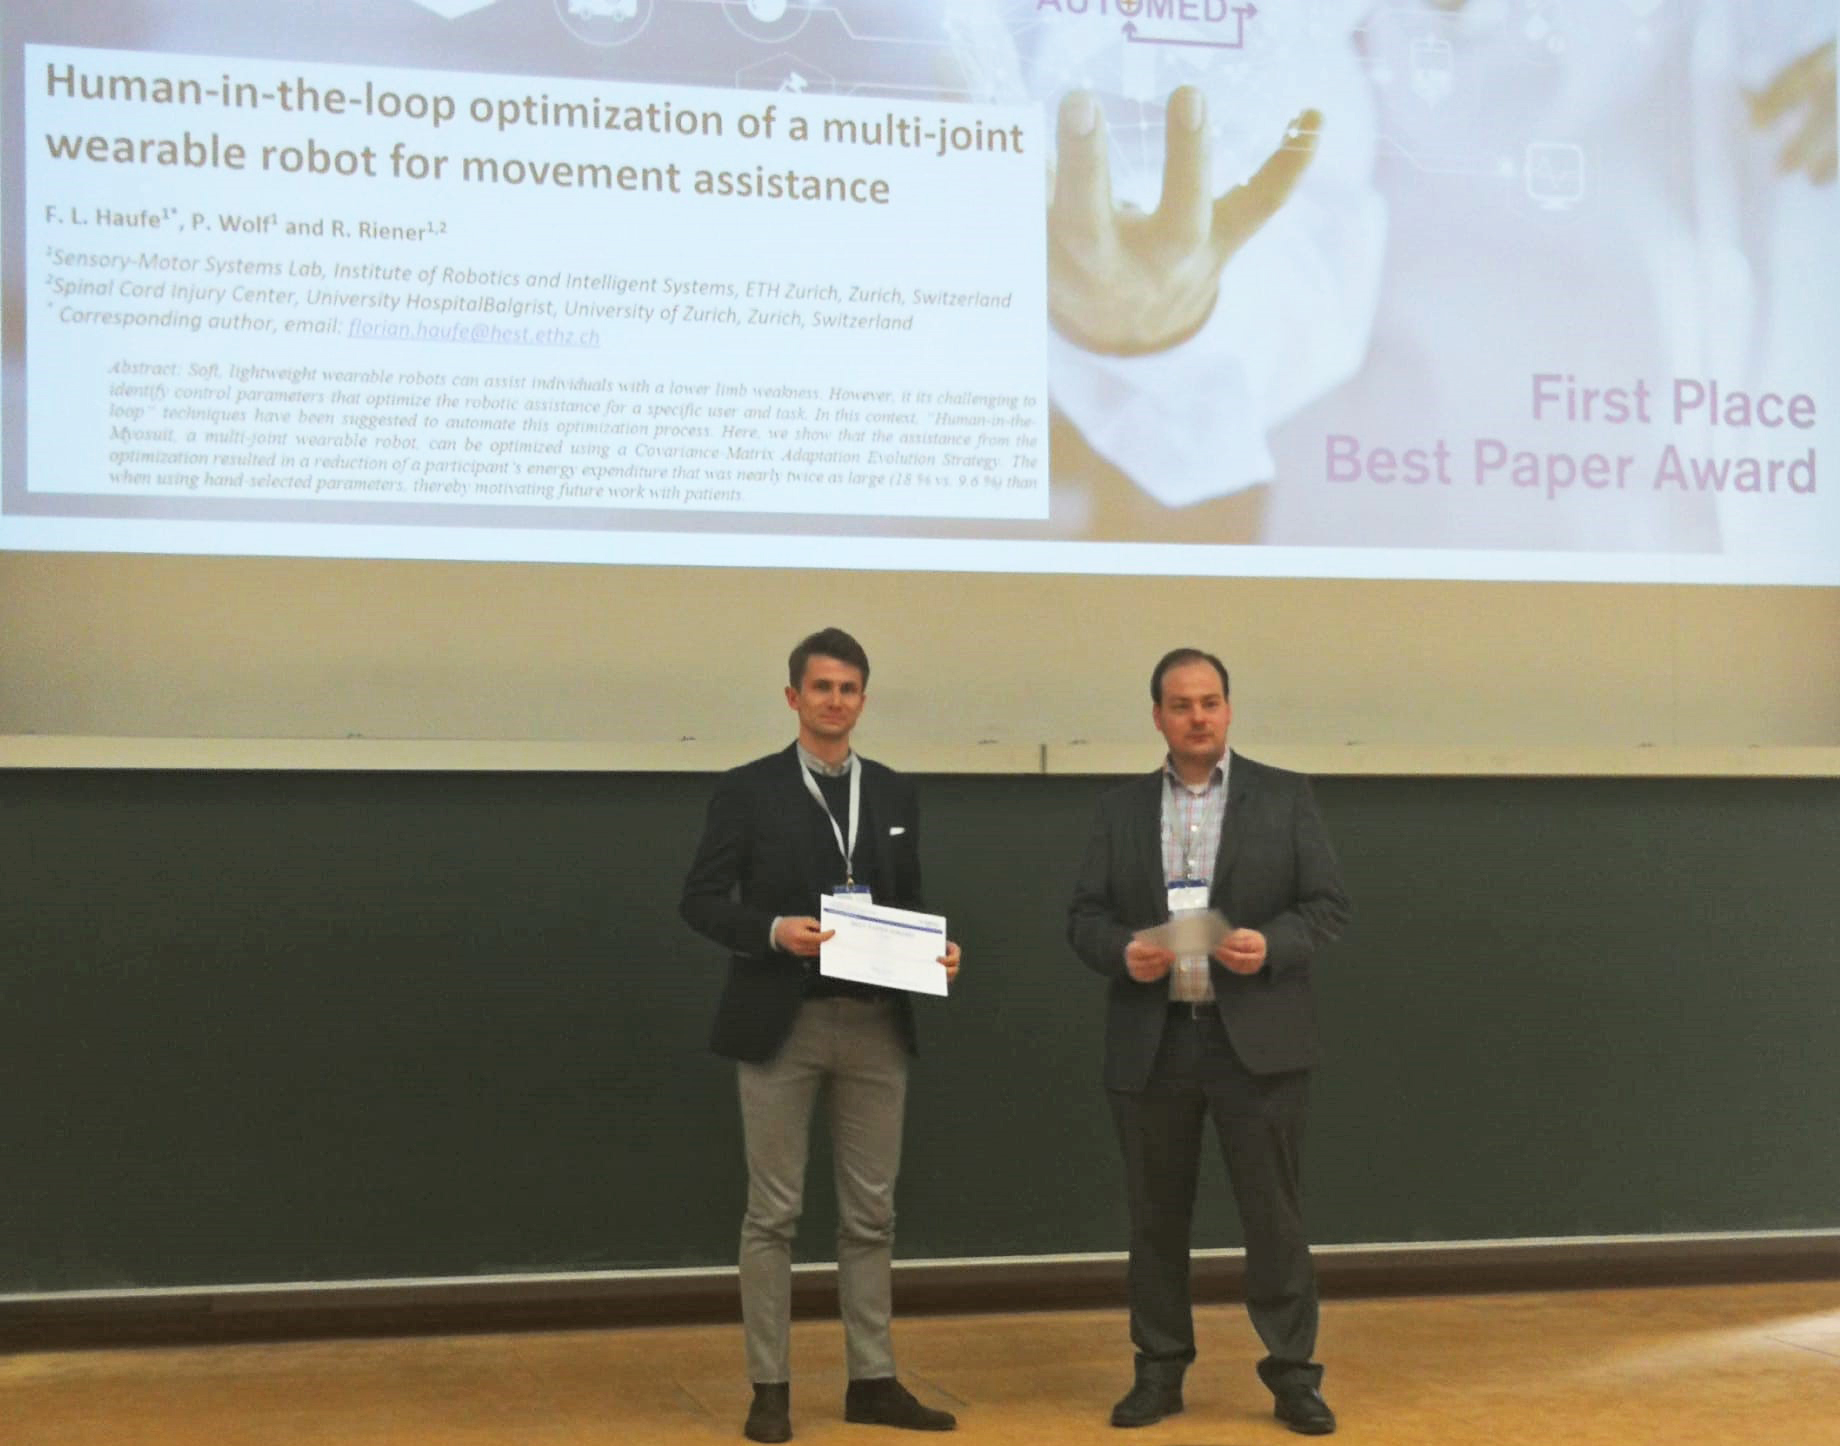 Florian Haufe receives the AUTOMED 2020 Best Paper Award